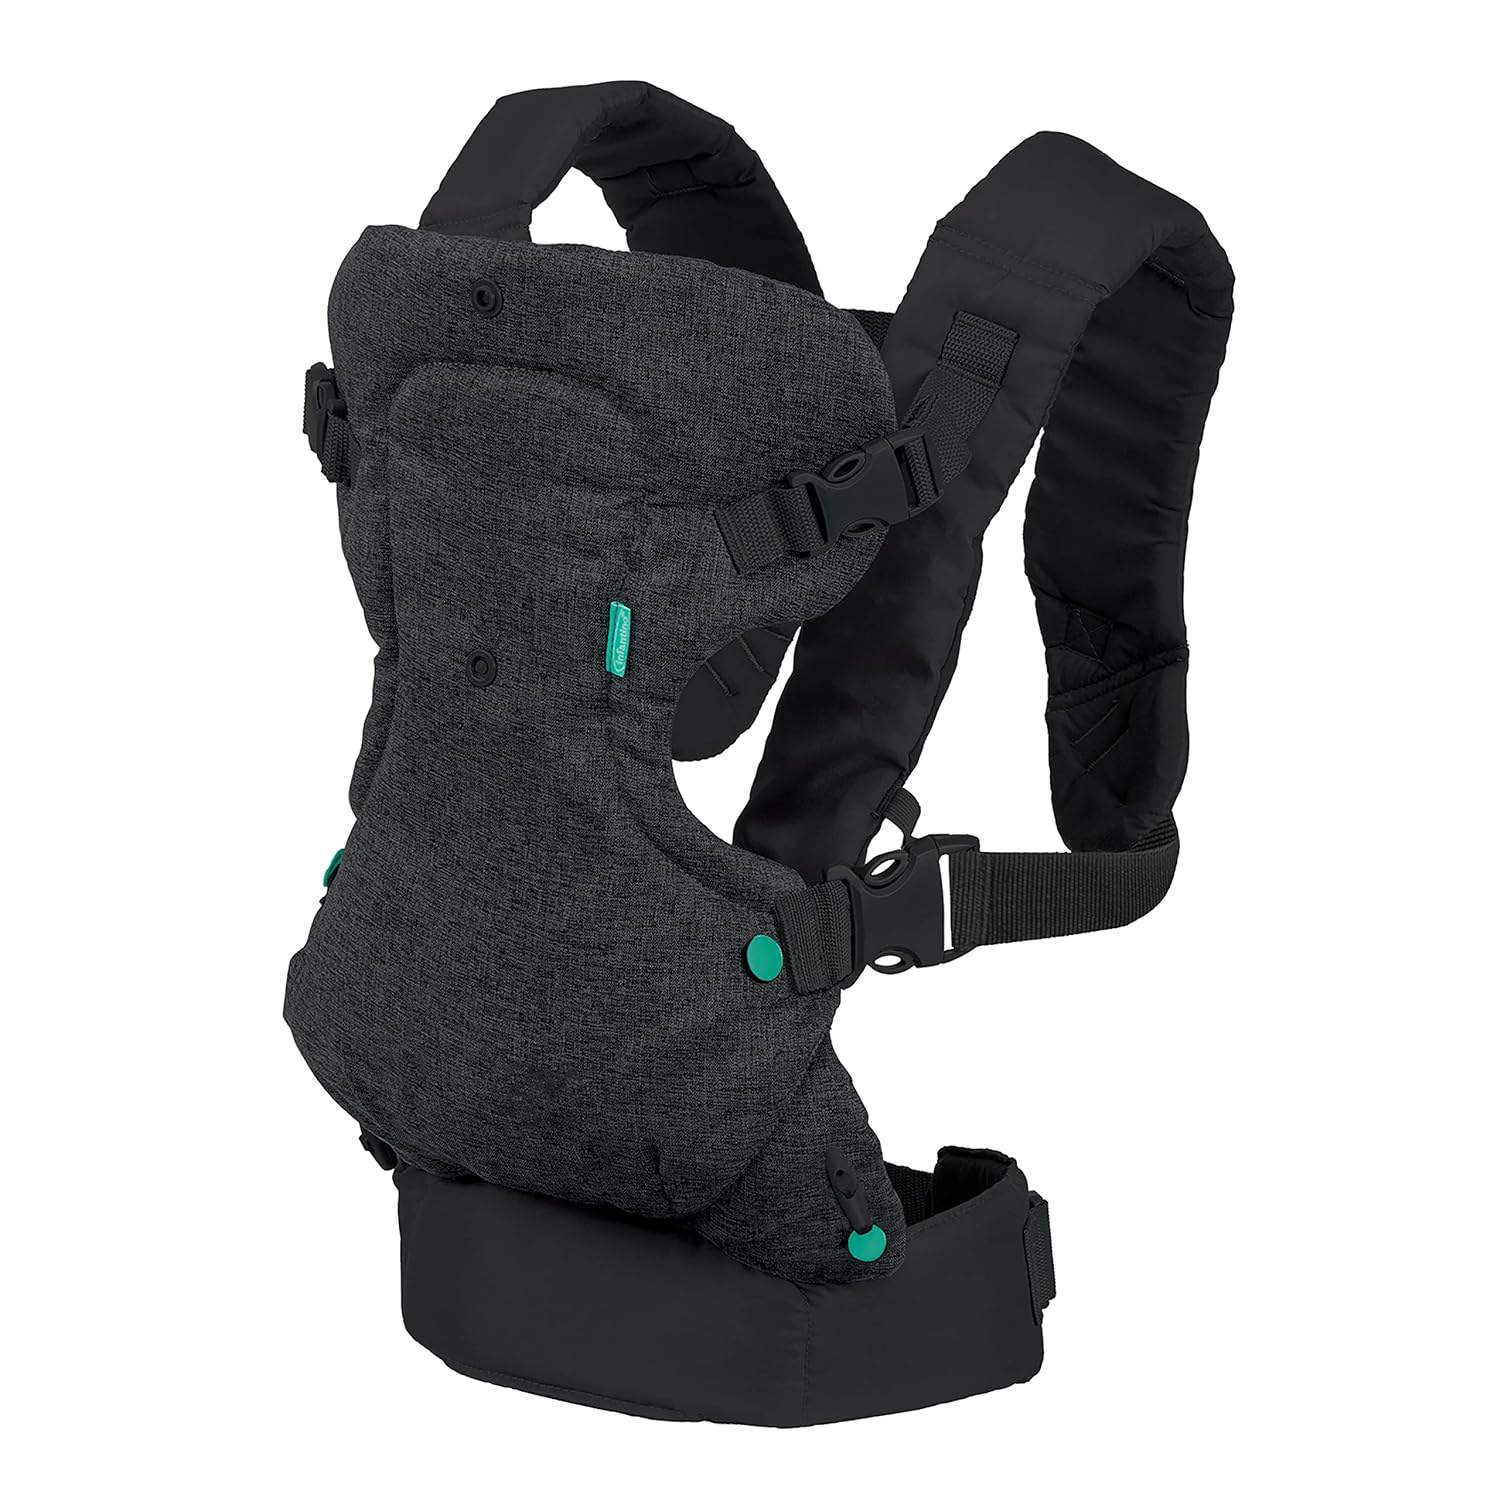 Infantino Flip Advanced 4-in-1 Convertible Carrier - Gray, One Size